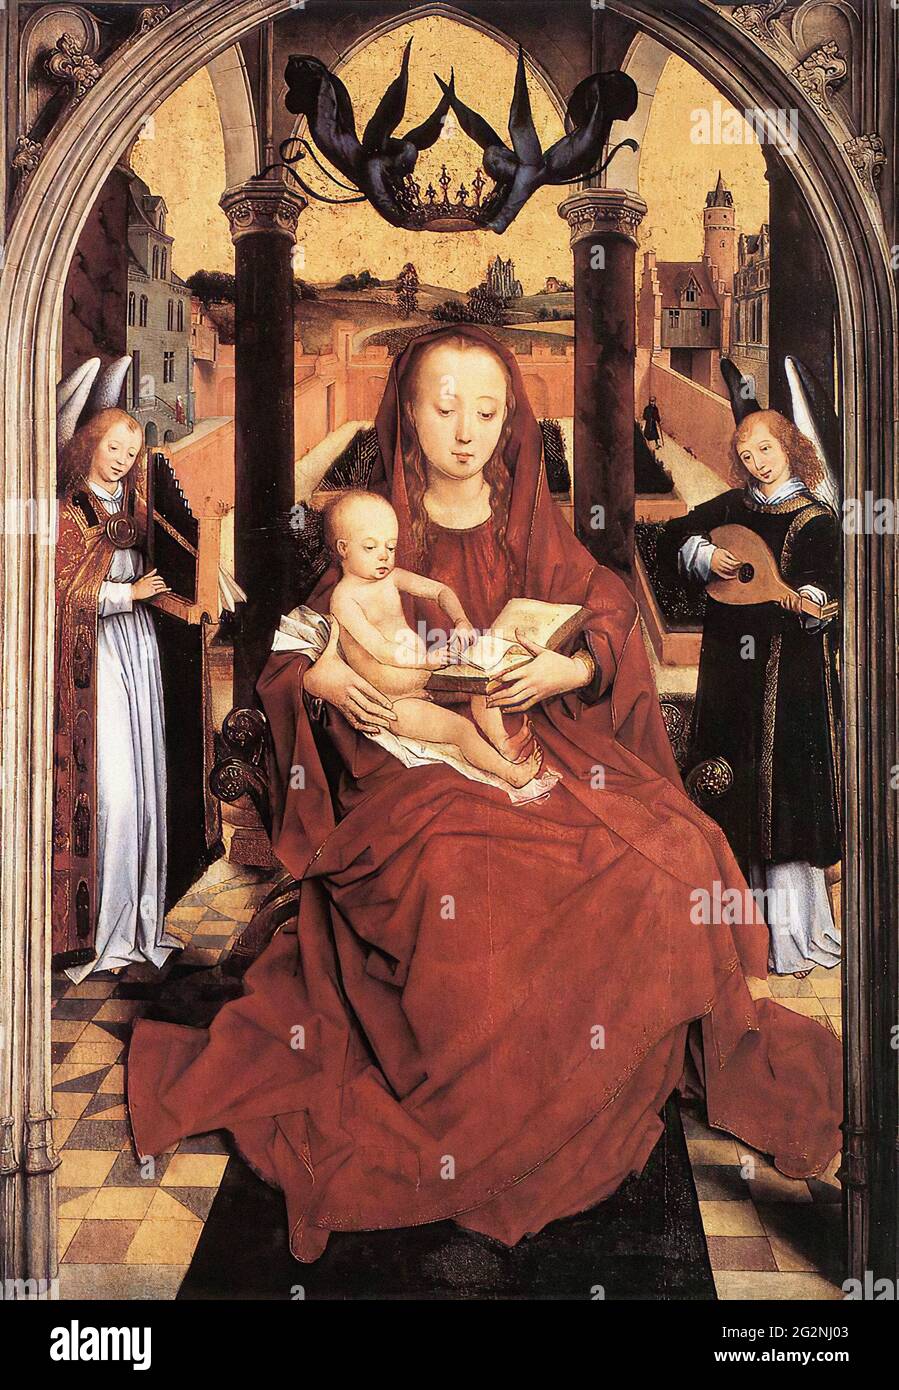 Hans Memling -  Virgin Child Enthroned with Two Musical Angels 1467 Stock Photo